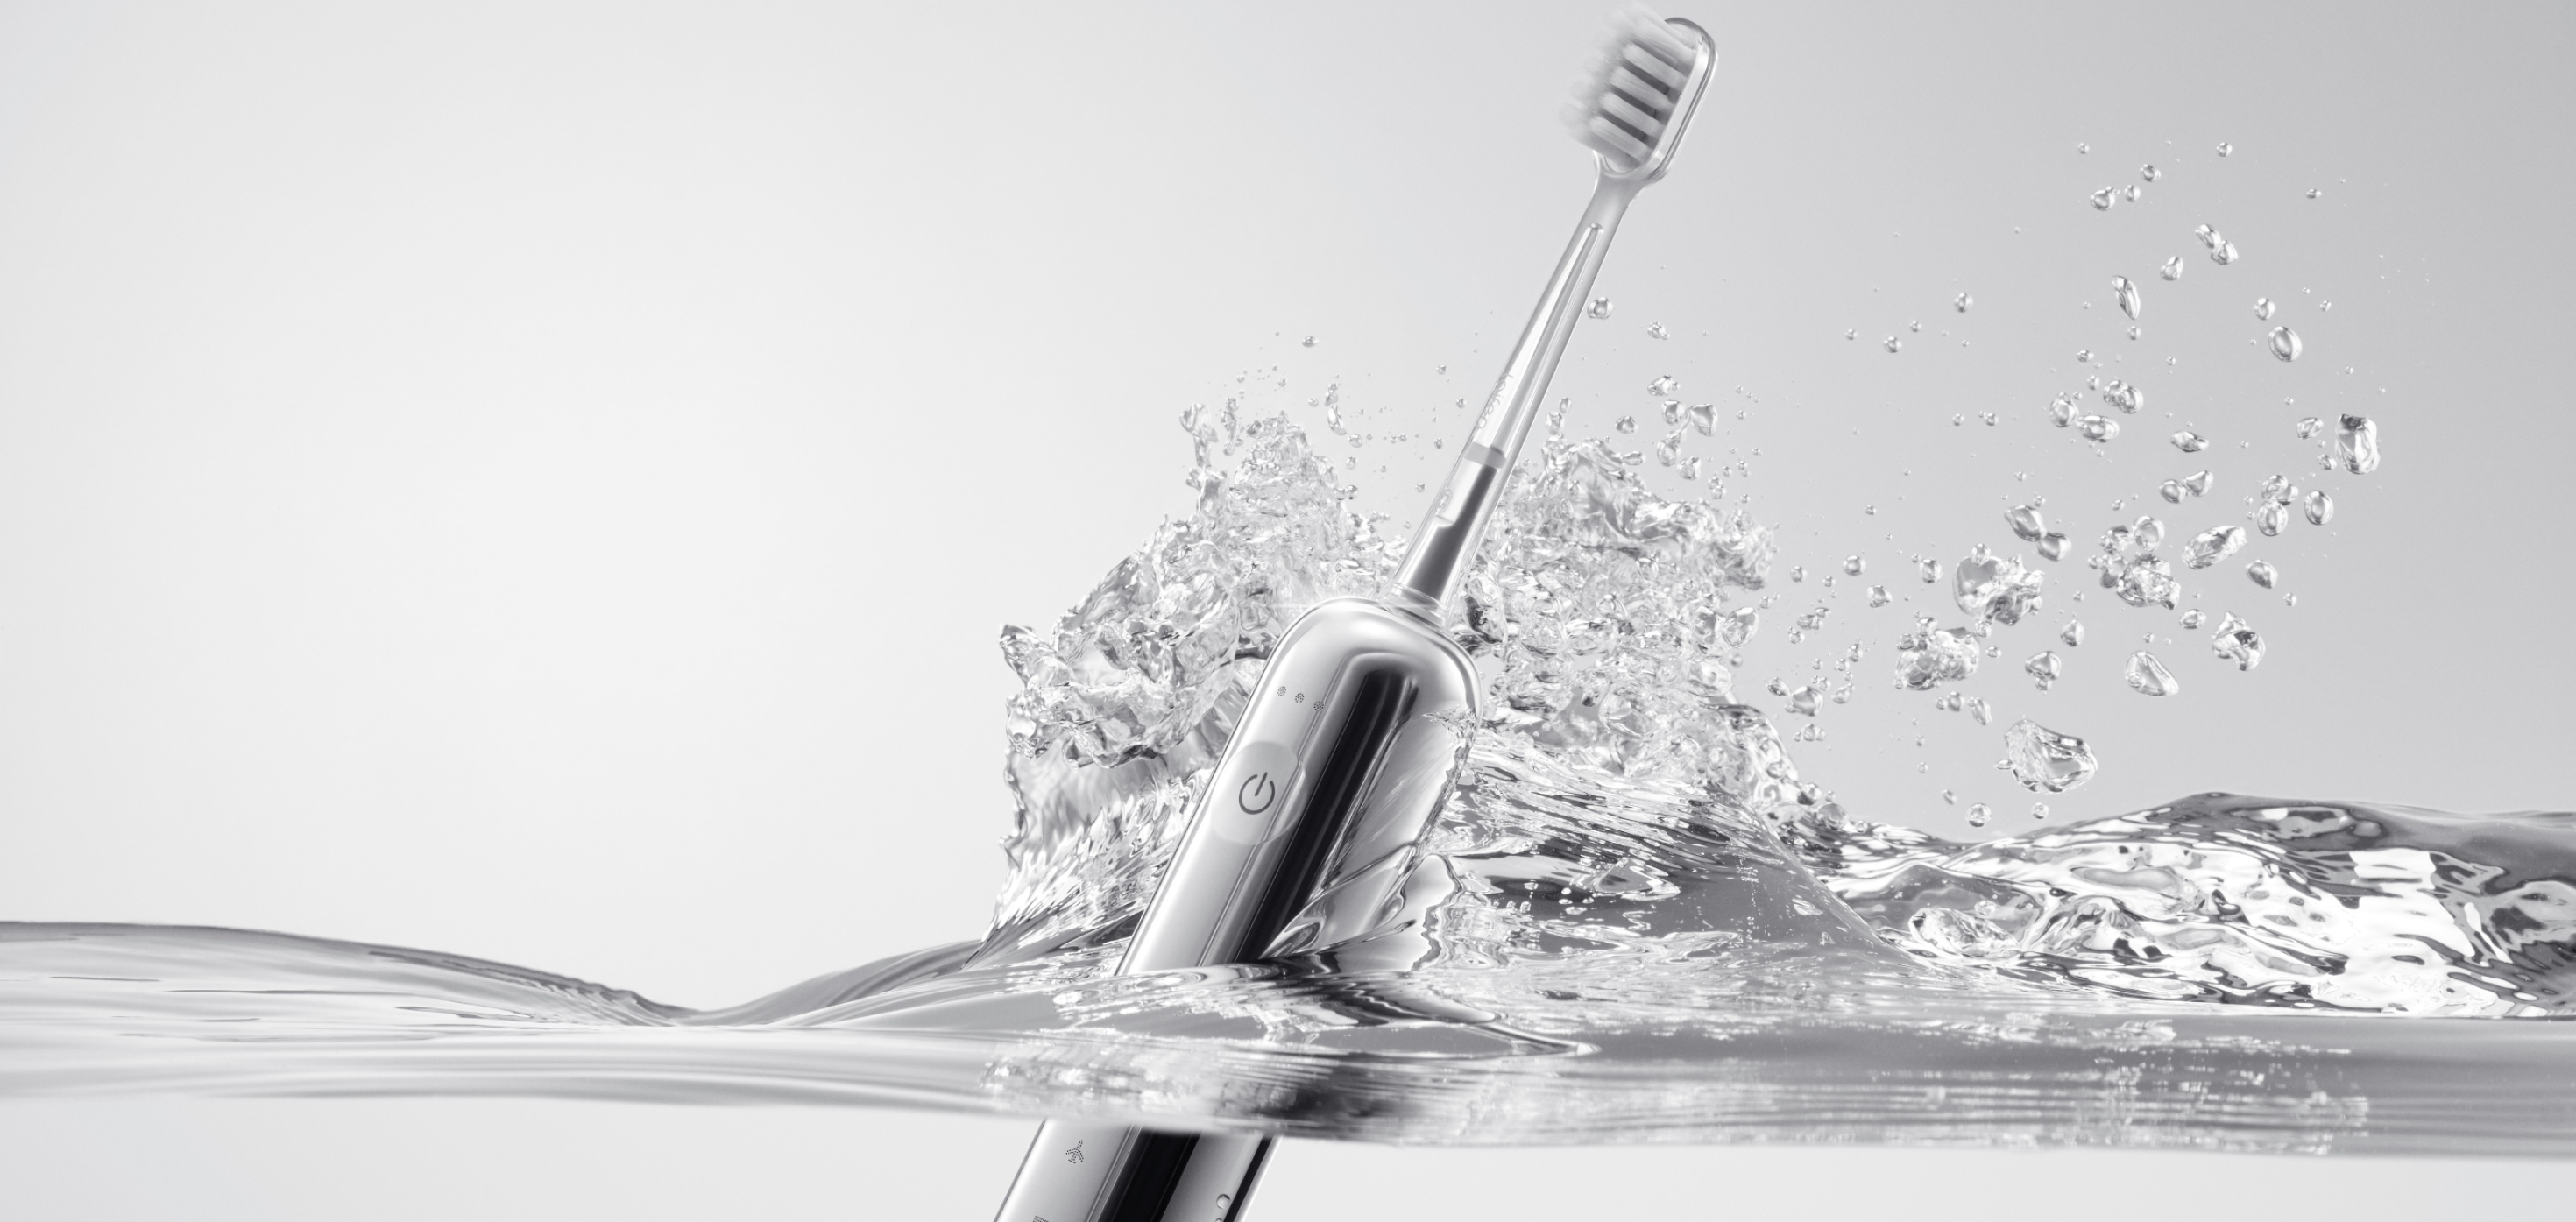 Our newly released product - Wave toothbrush